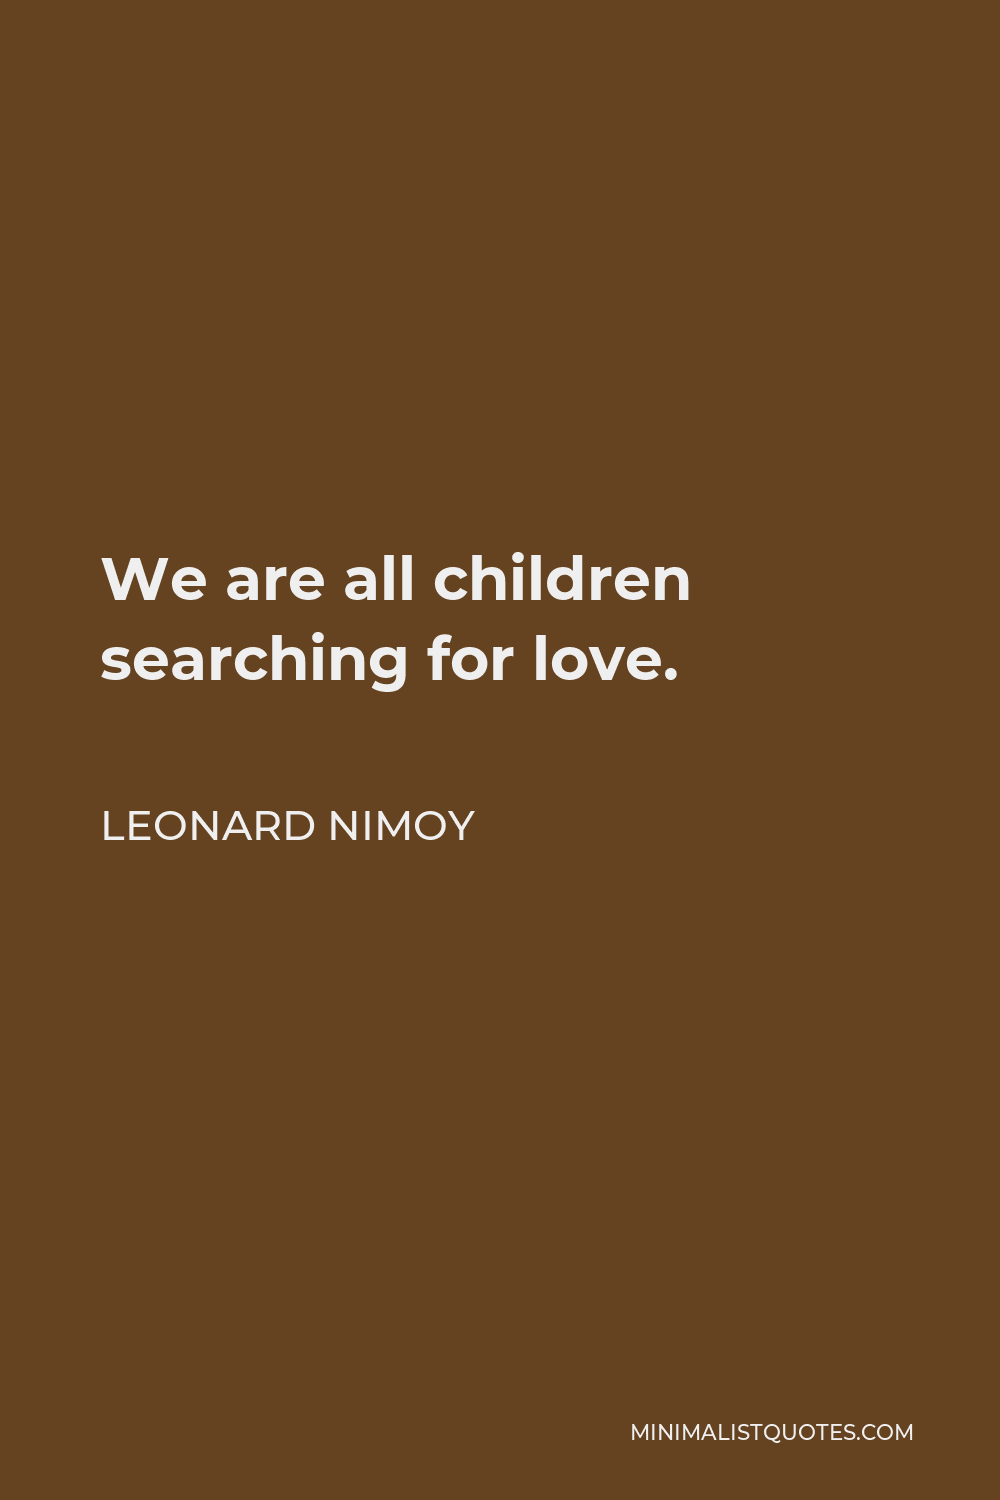 Leonard Nimoy Quote - We are all children searching for love.